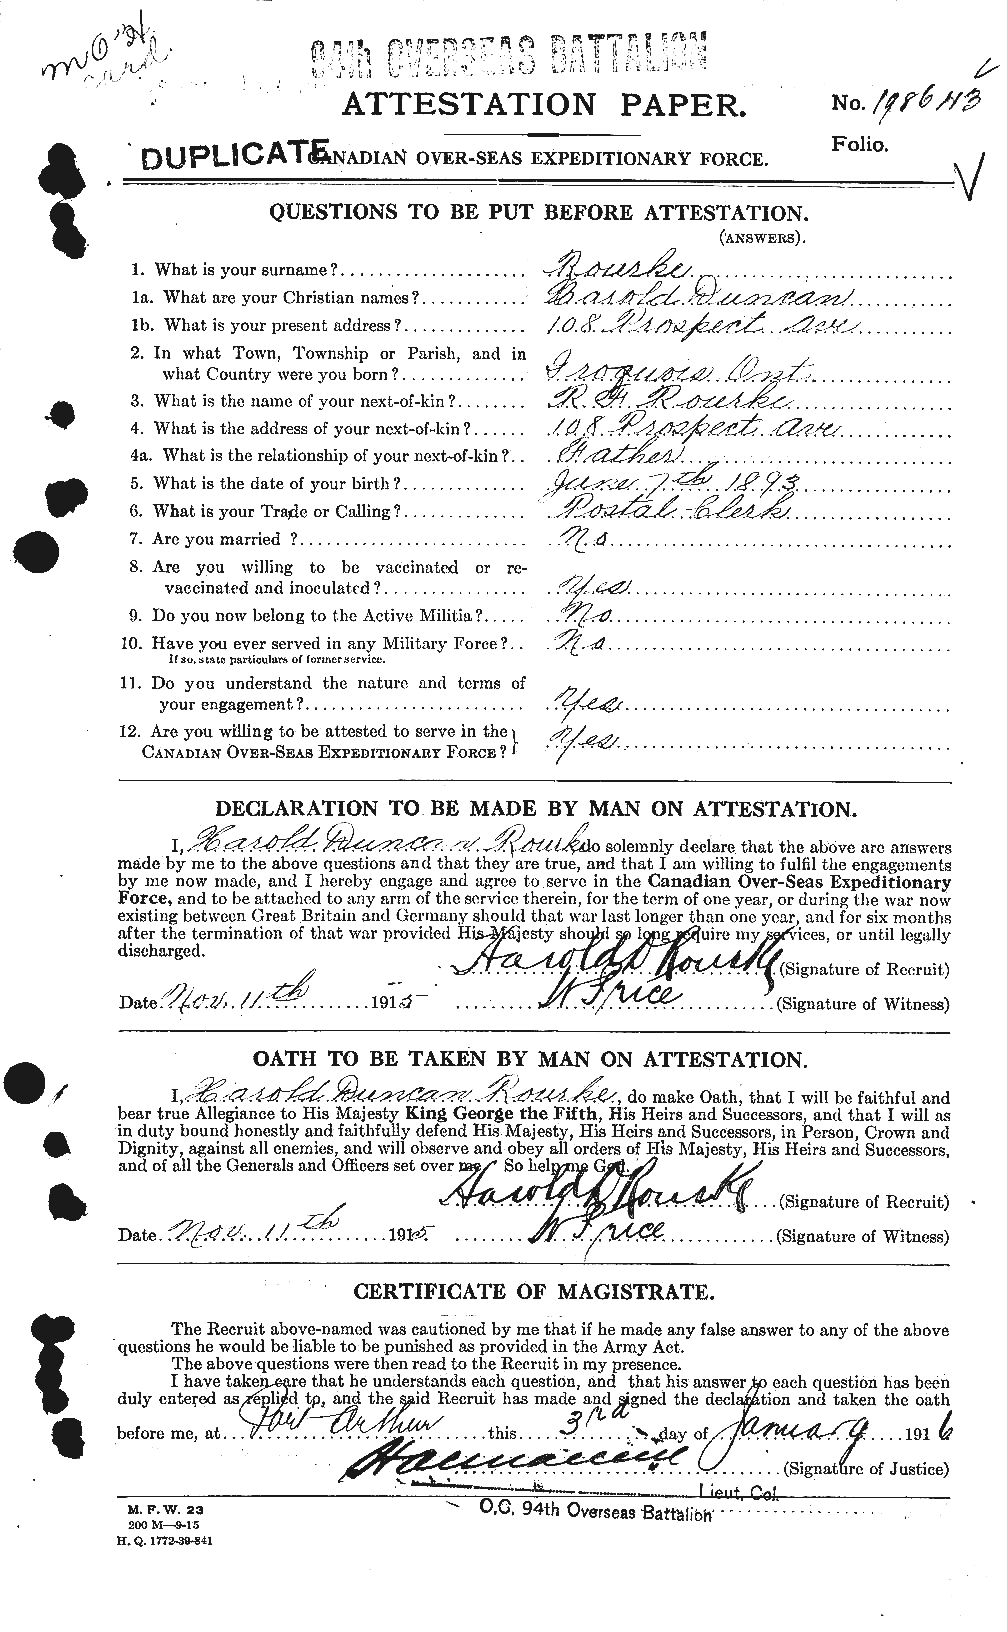 Personnel Records of the First World War - CEF 617520a